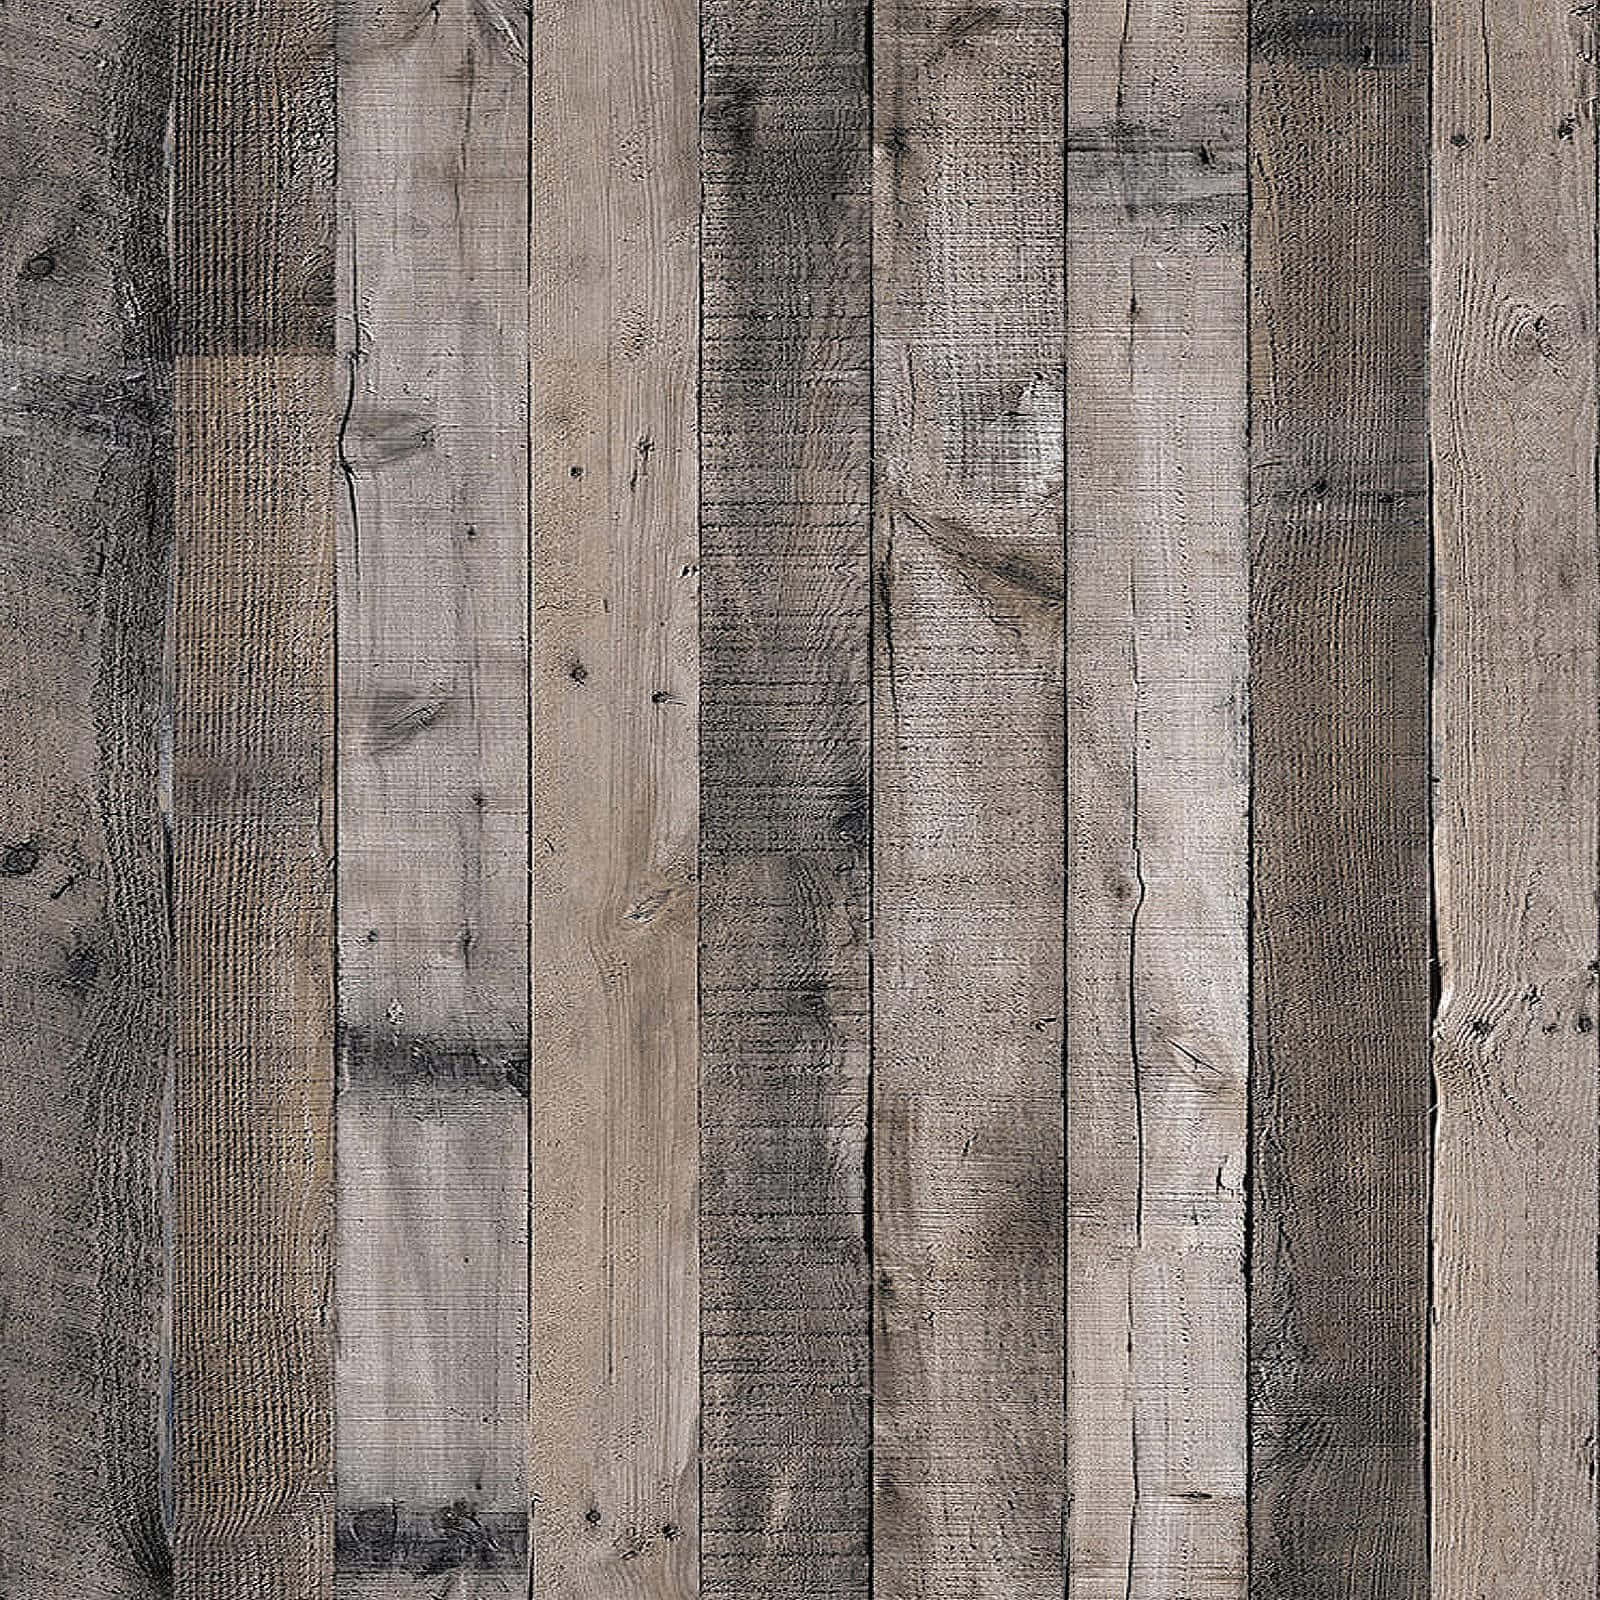 Rustic grey wood texture background